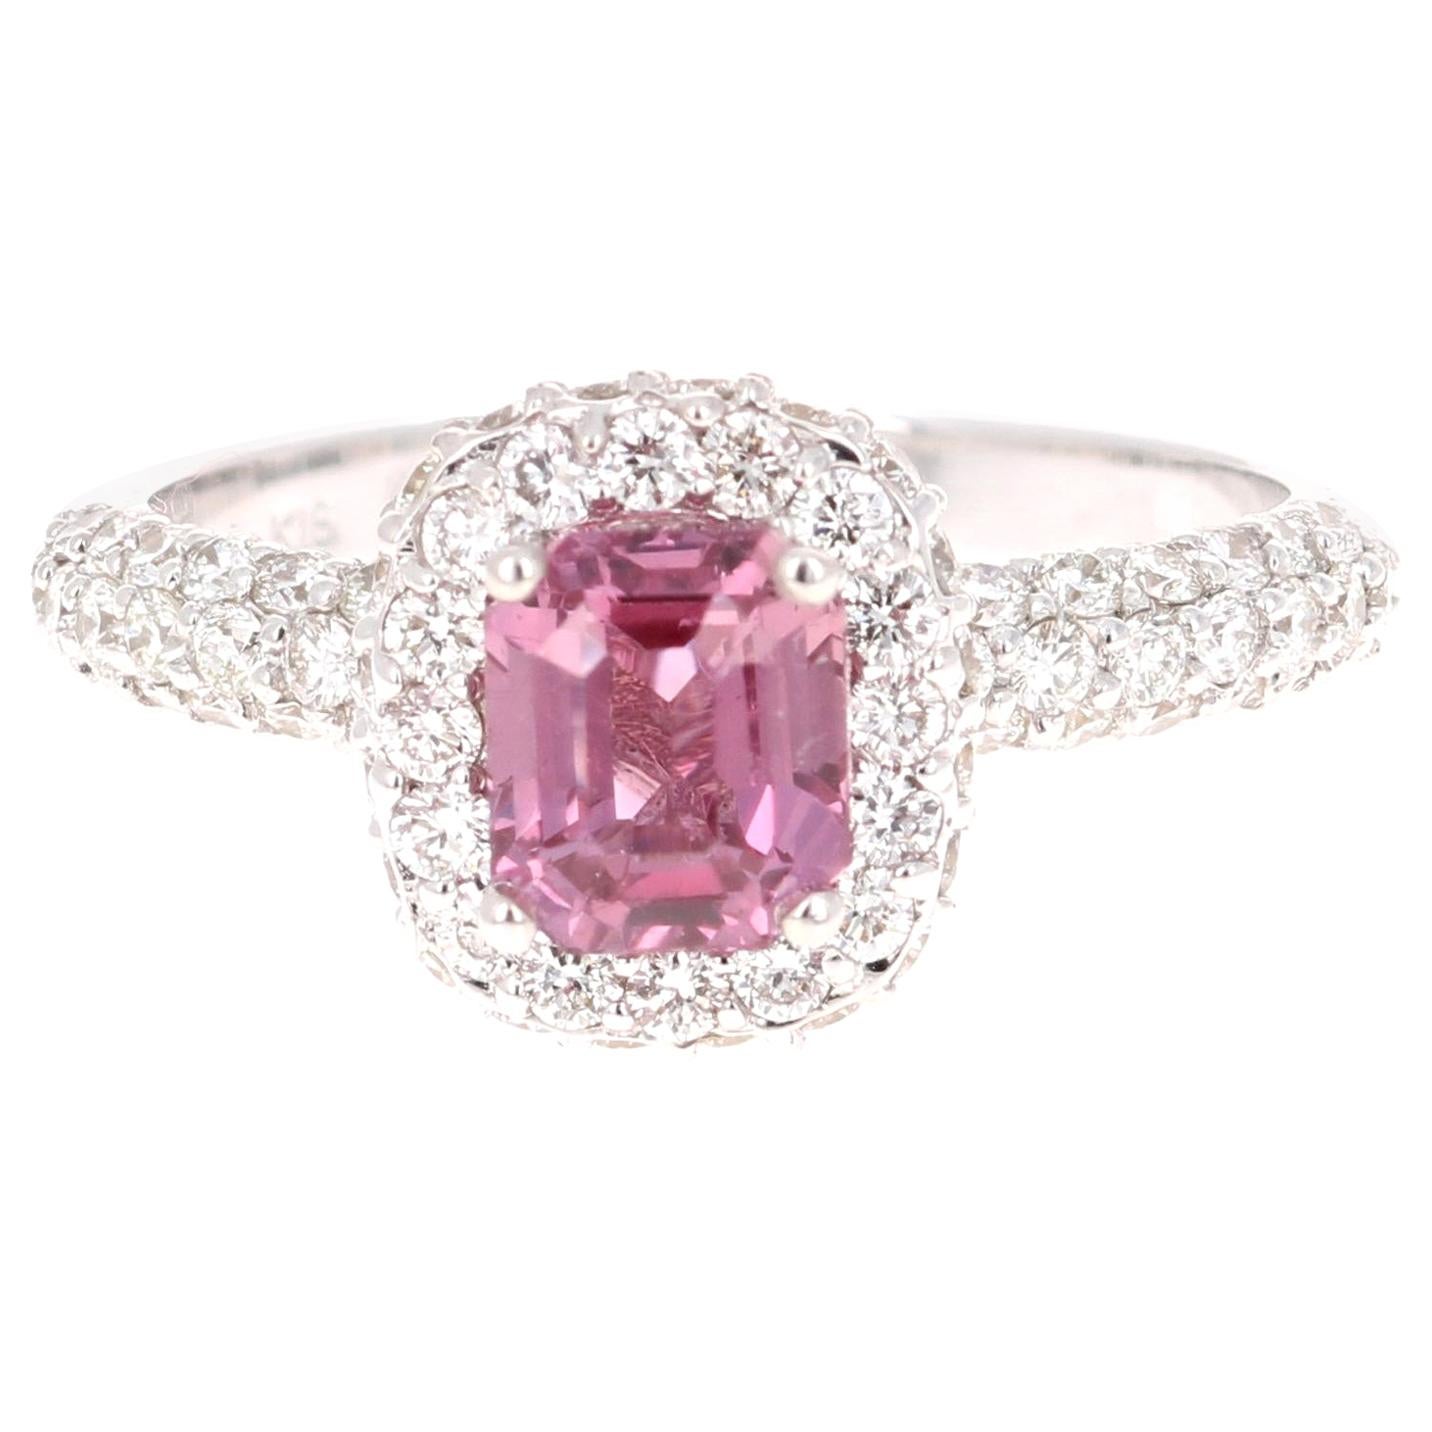 GIA Certified 2.44 Carat Pink Sapphire Diamond White Gold Engagement Ring For Sale